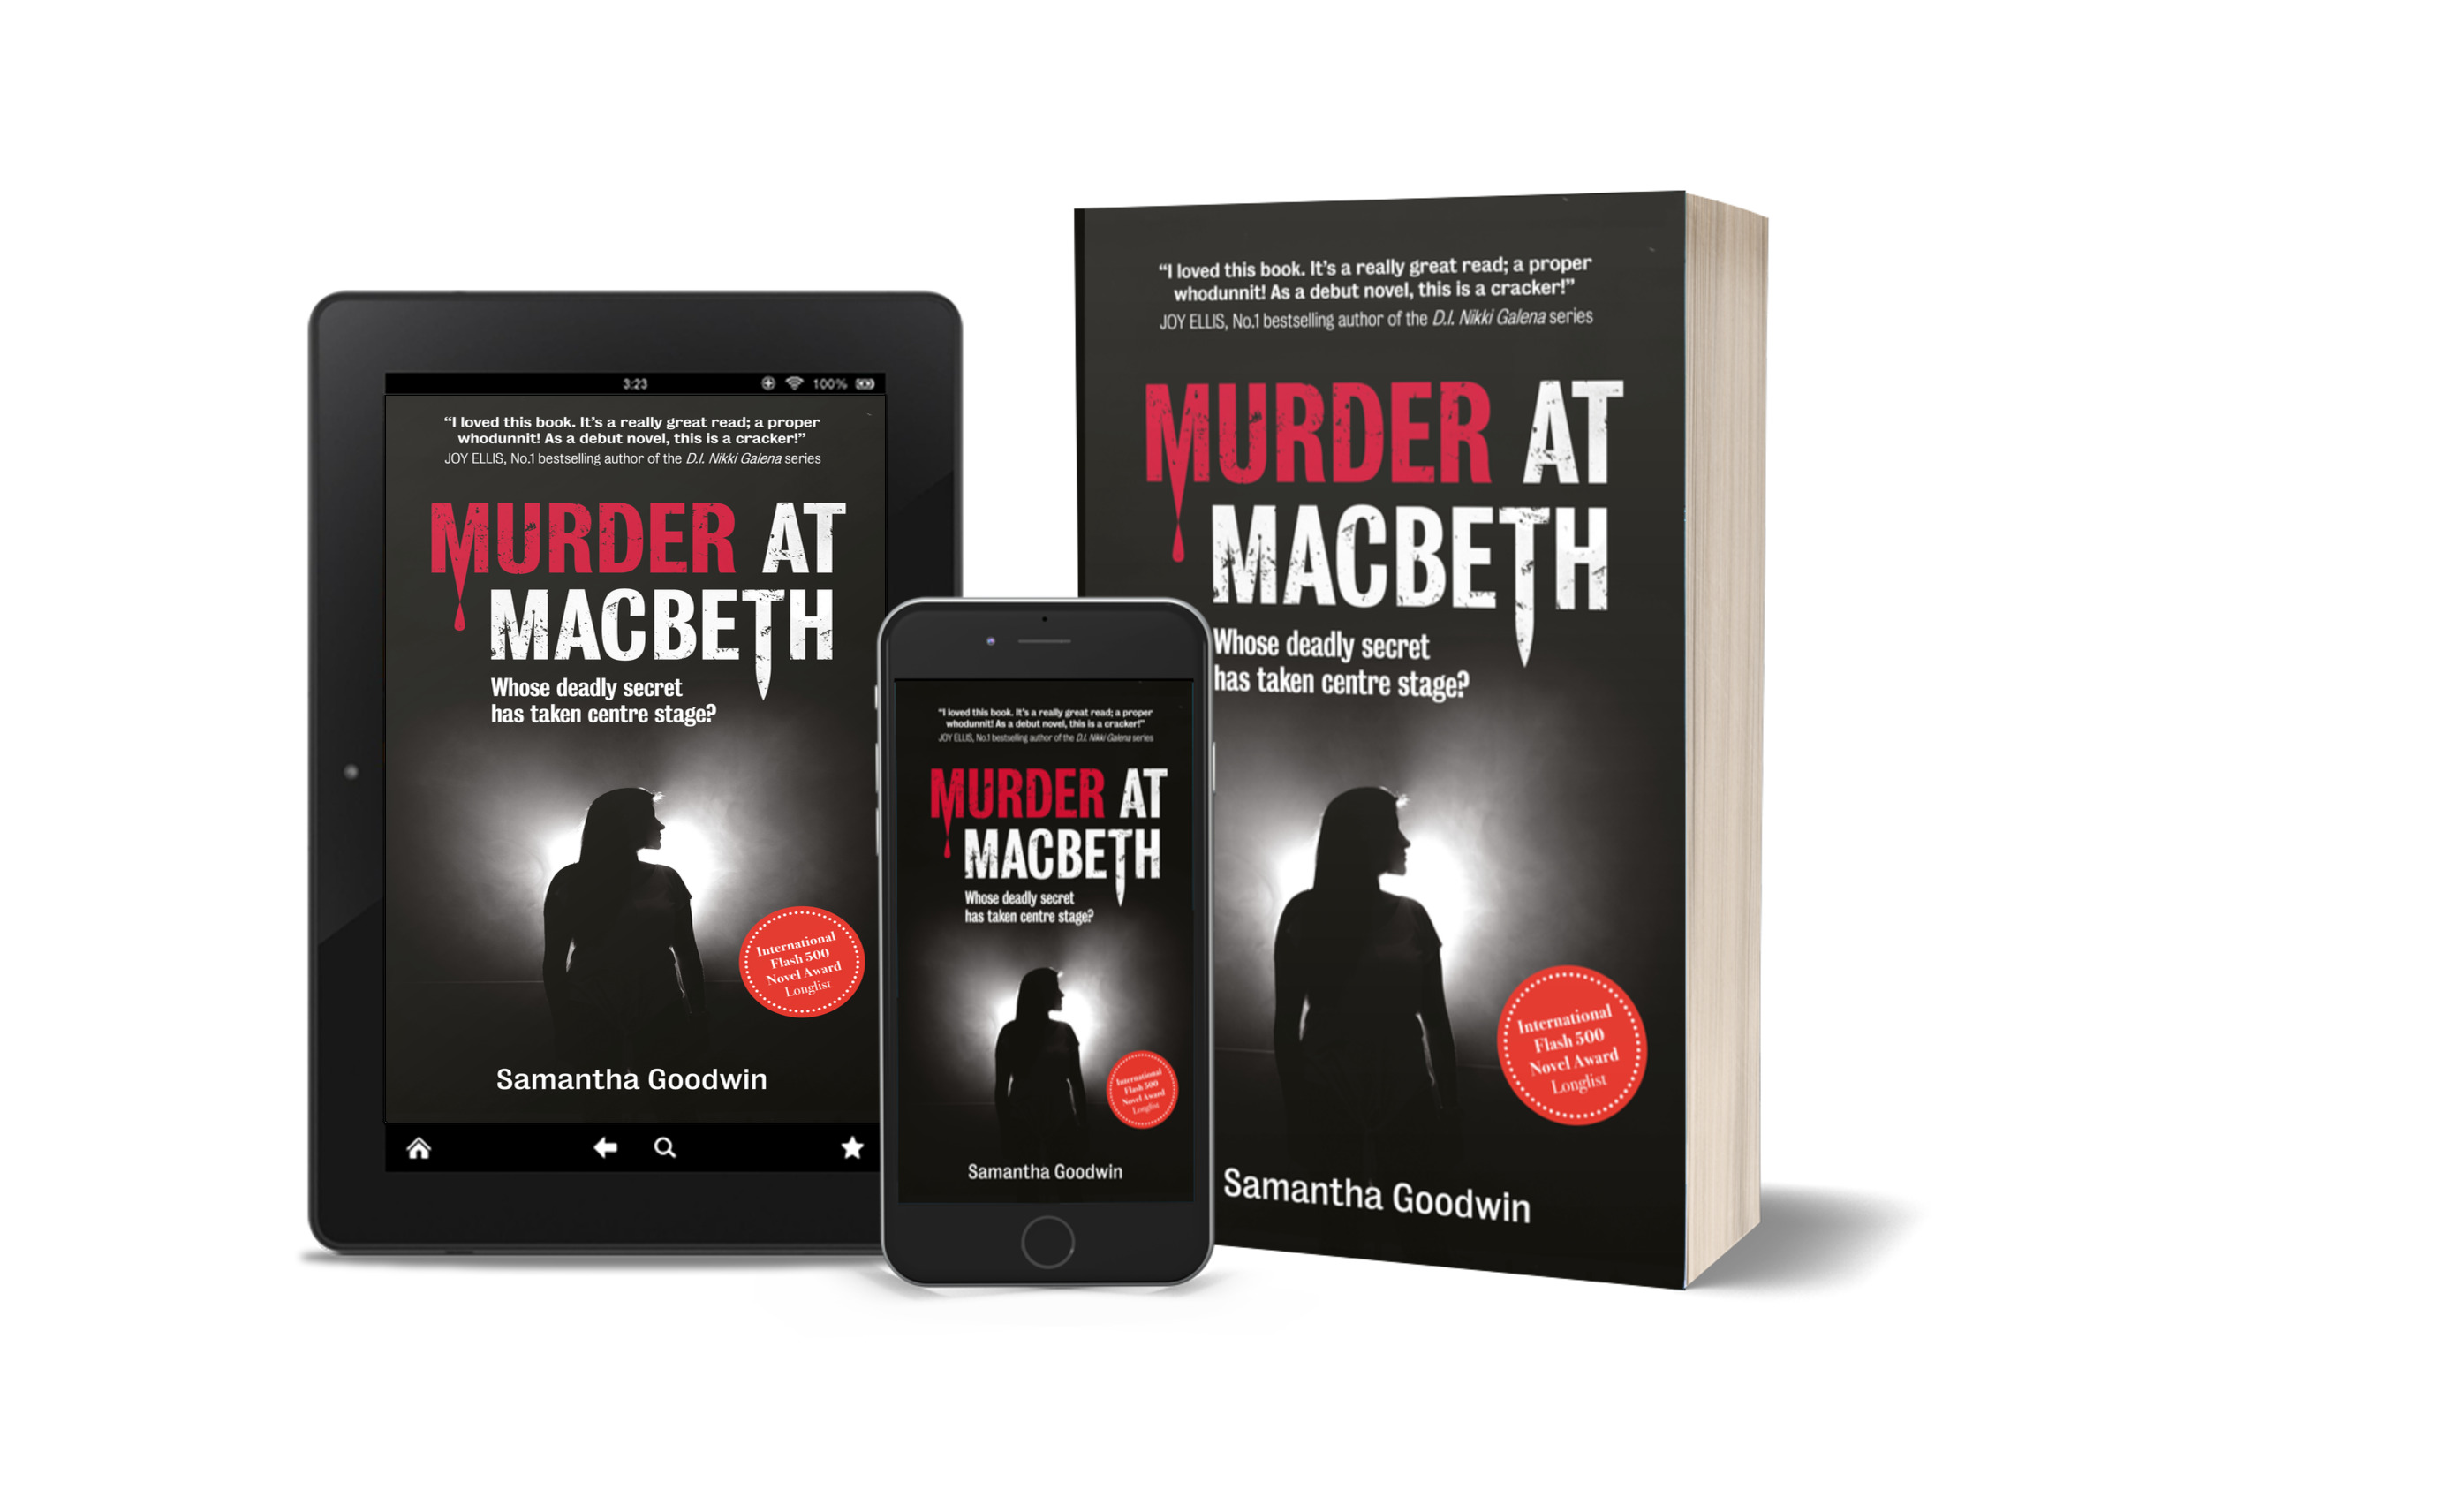 Murder at Macbeth image group of books